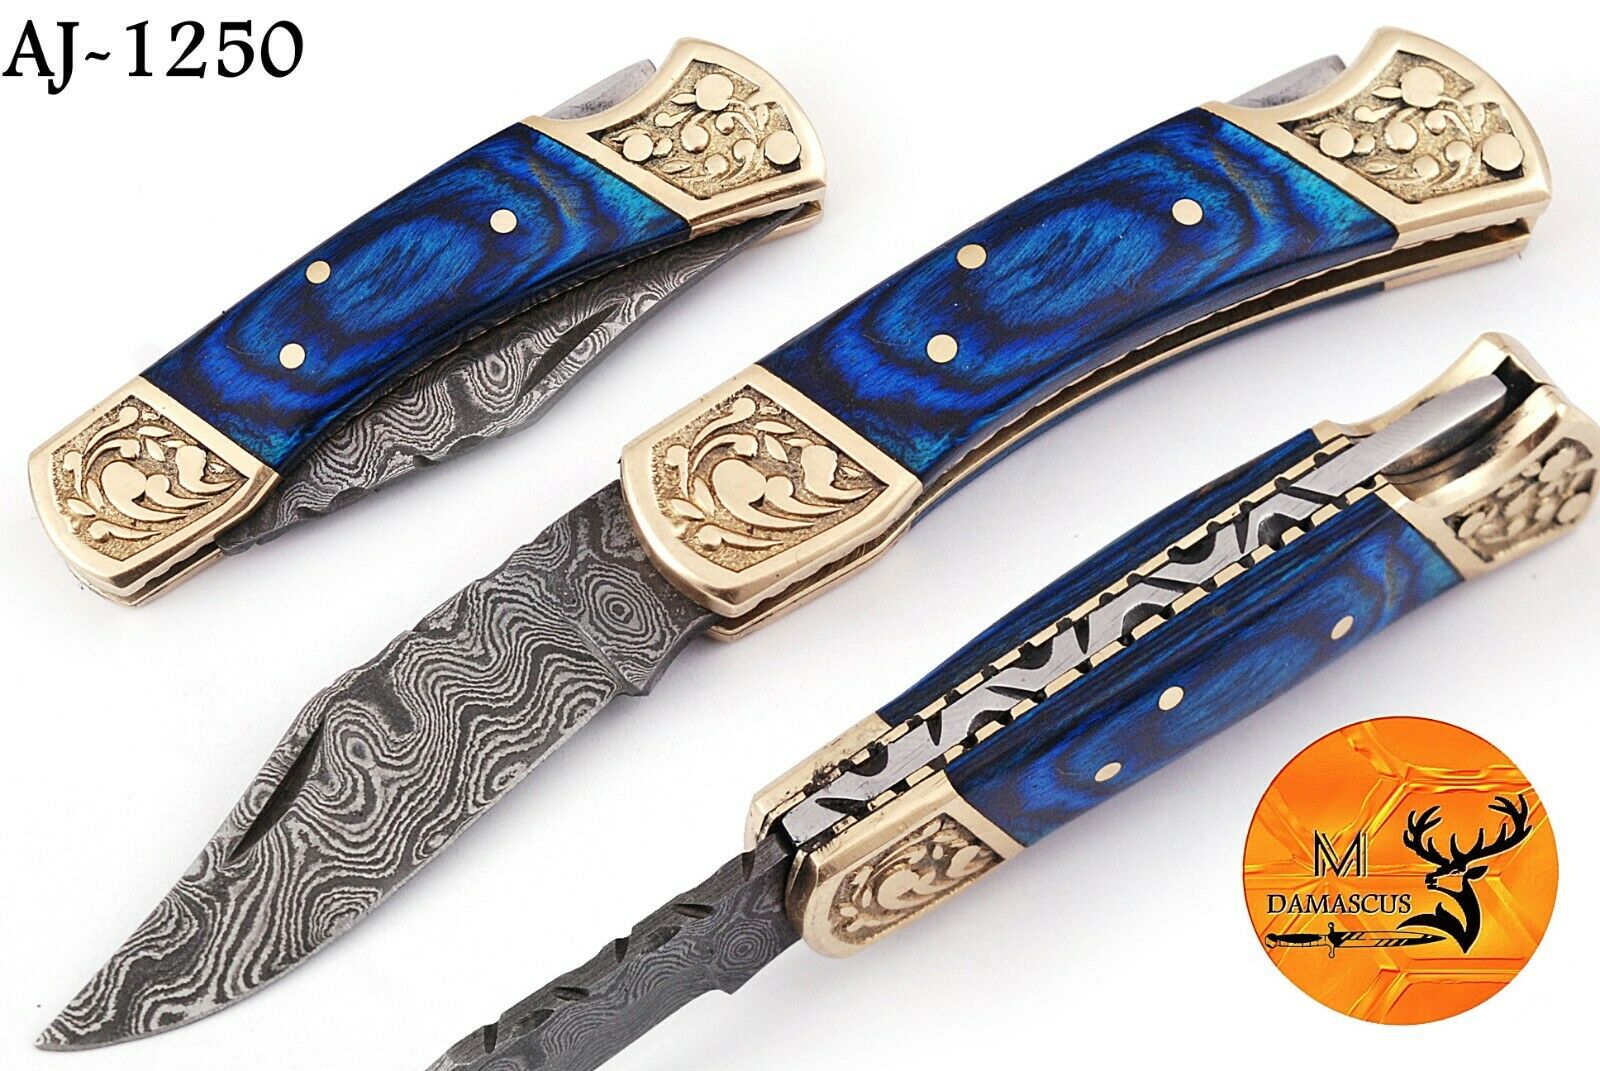 3" Inch Hand Forged Damascus Steel Folding Pocket Knife With Wood Handle Aj 1250